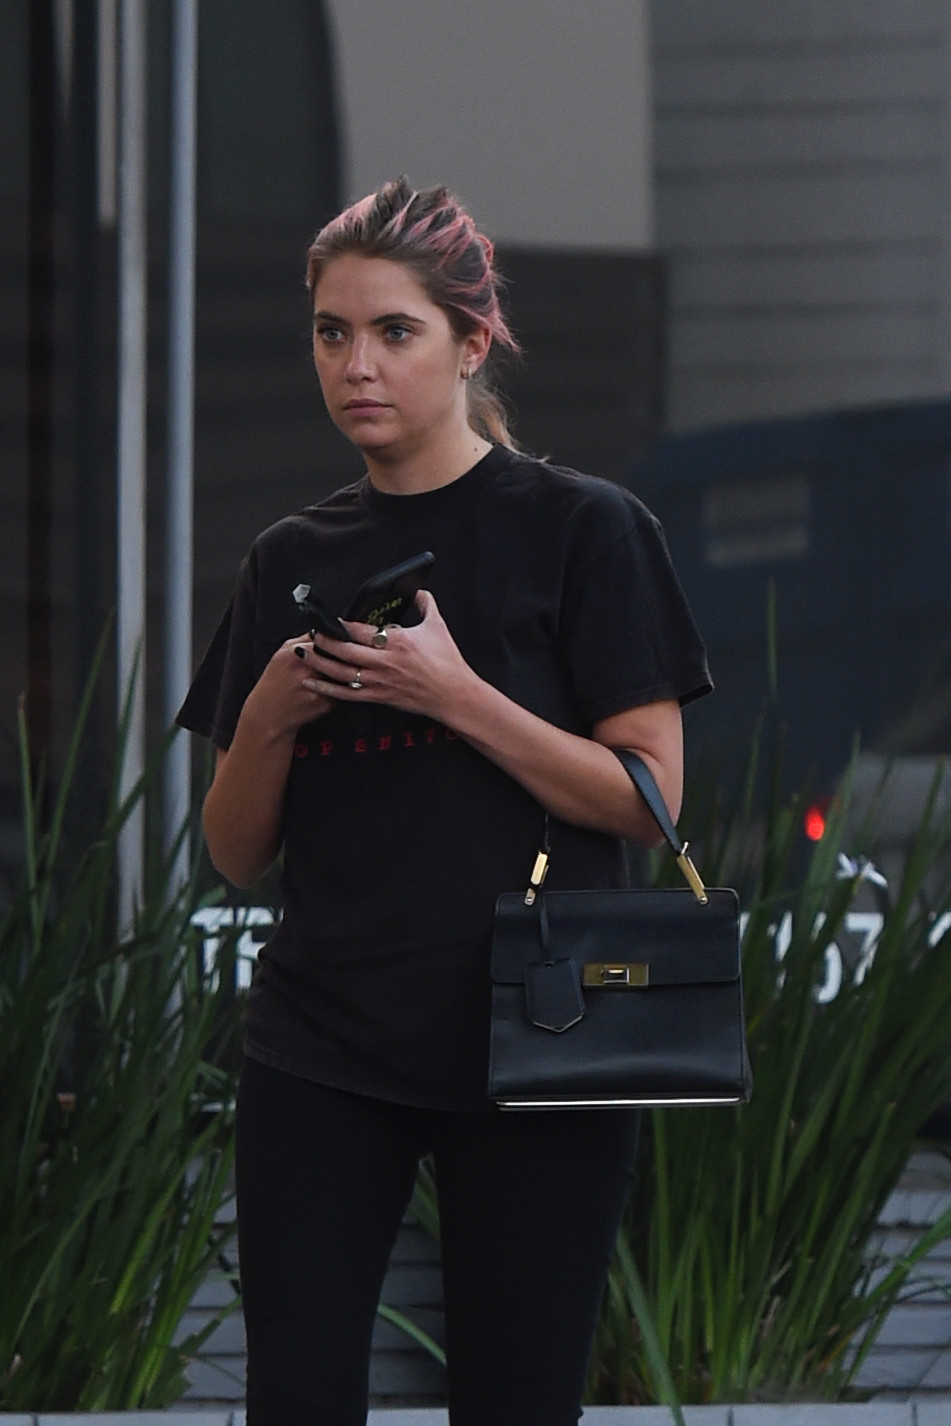 Ashley Benson shows off her new pink hair as she goes to the salon